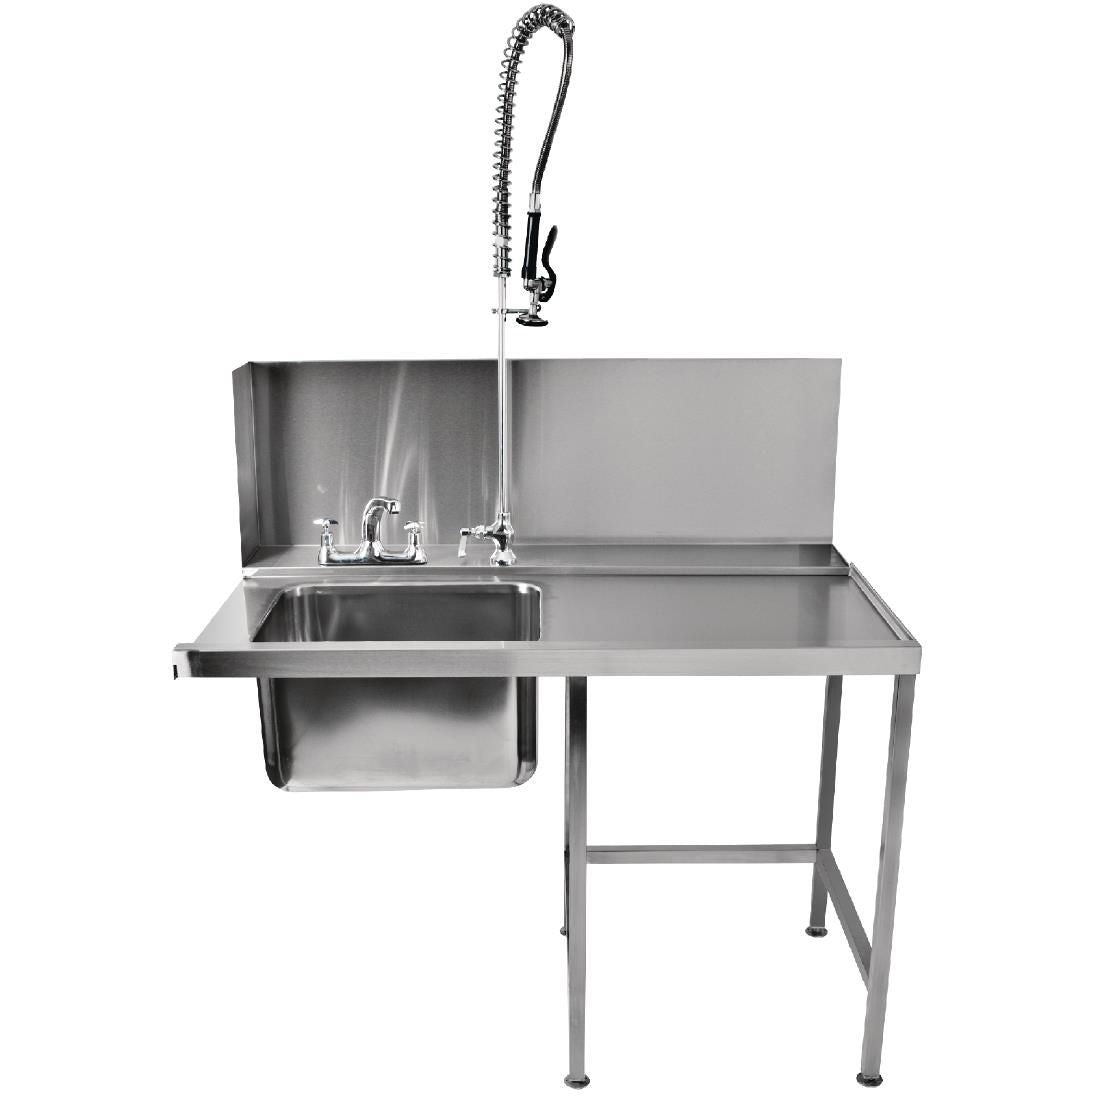 GD926 Classeq Pass-Through Table with Spray Mixer T11SENR JD Catering Equipment Solutions Ltd